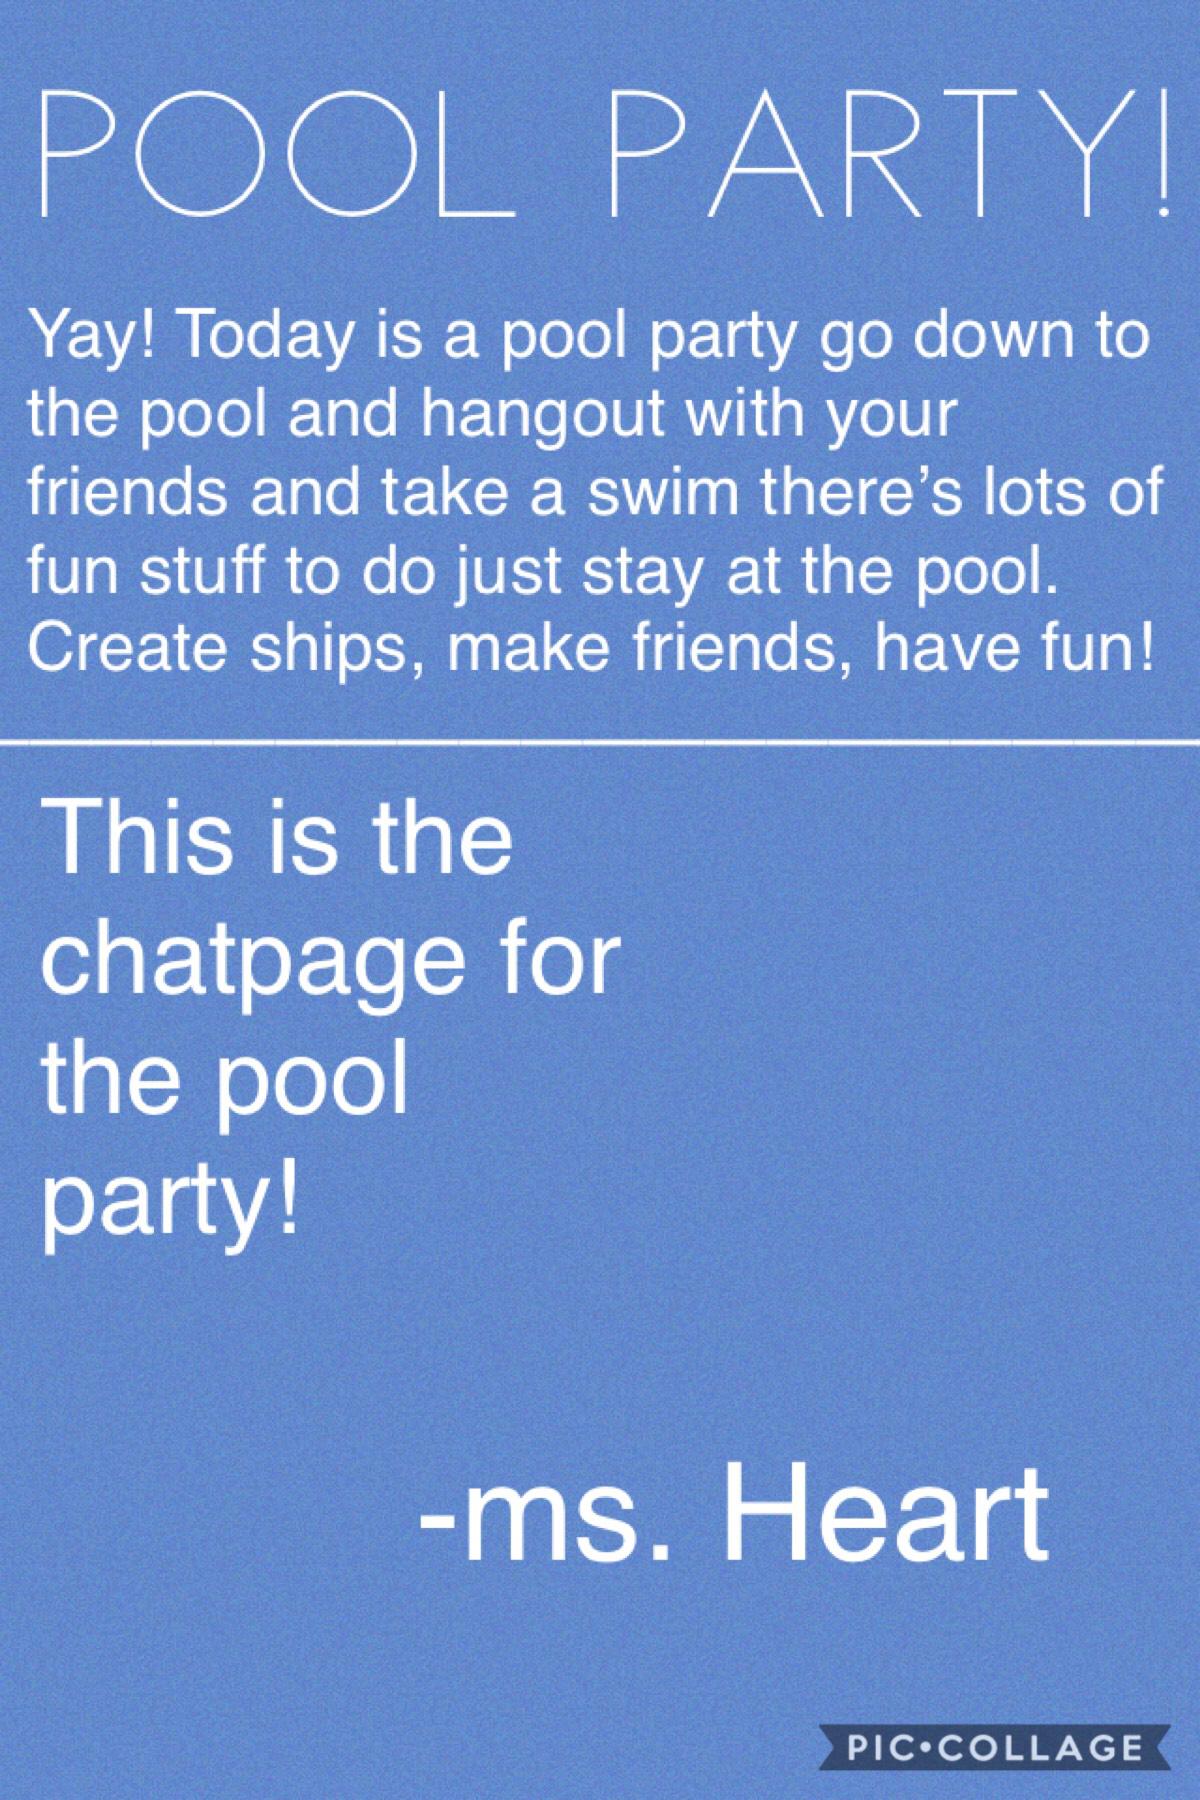 Pool party time! 